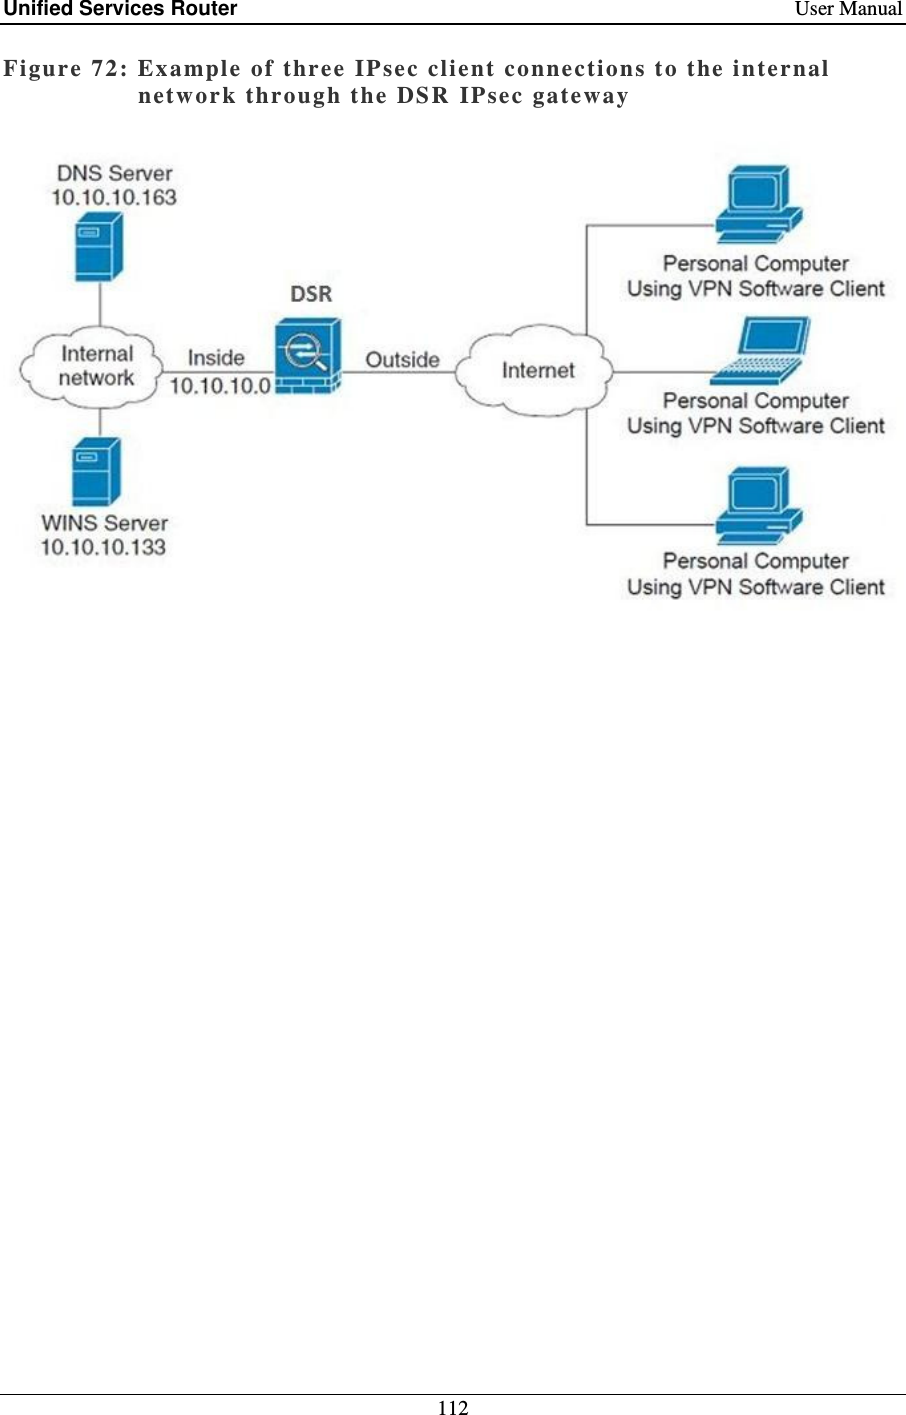 Unified Services Router    User Manual 112  Figure 72: Example  of three  IPsec client connections to the internal networ k through t he  DSR  IPsec gateway   